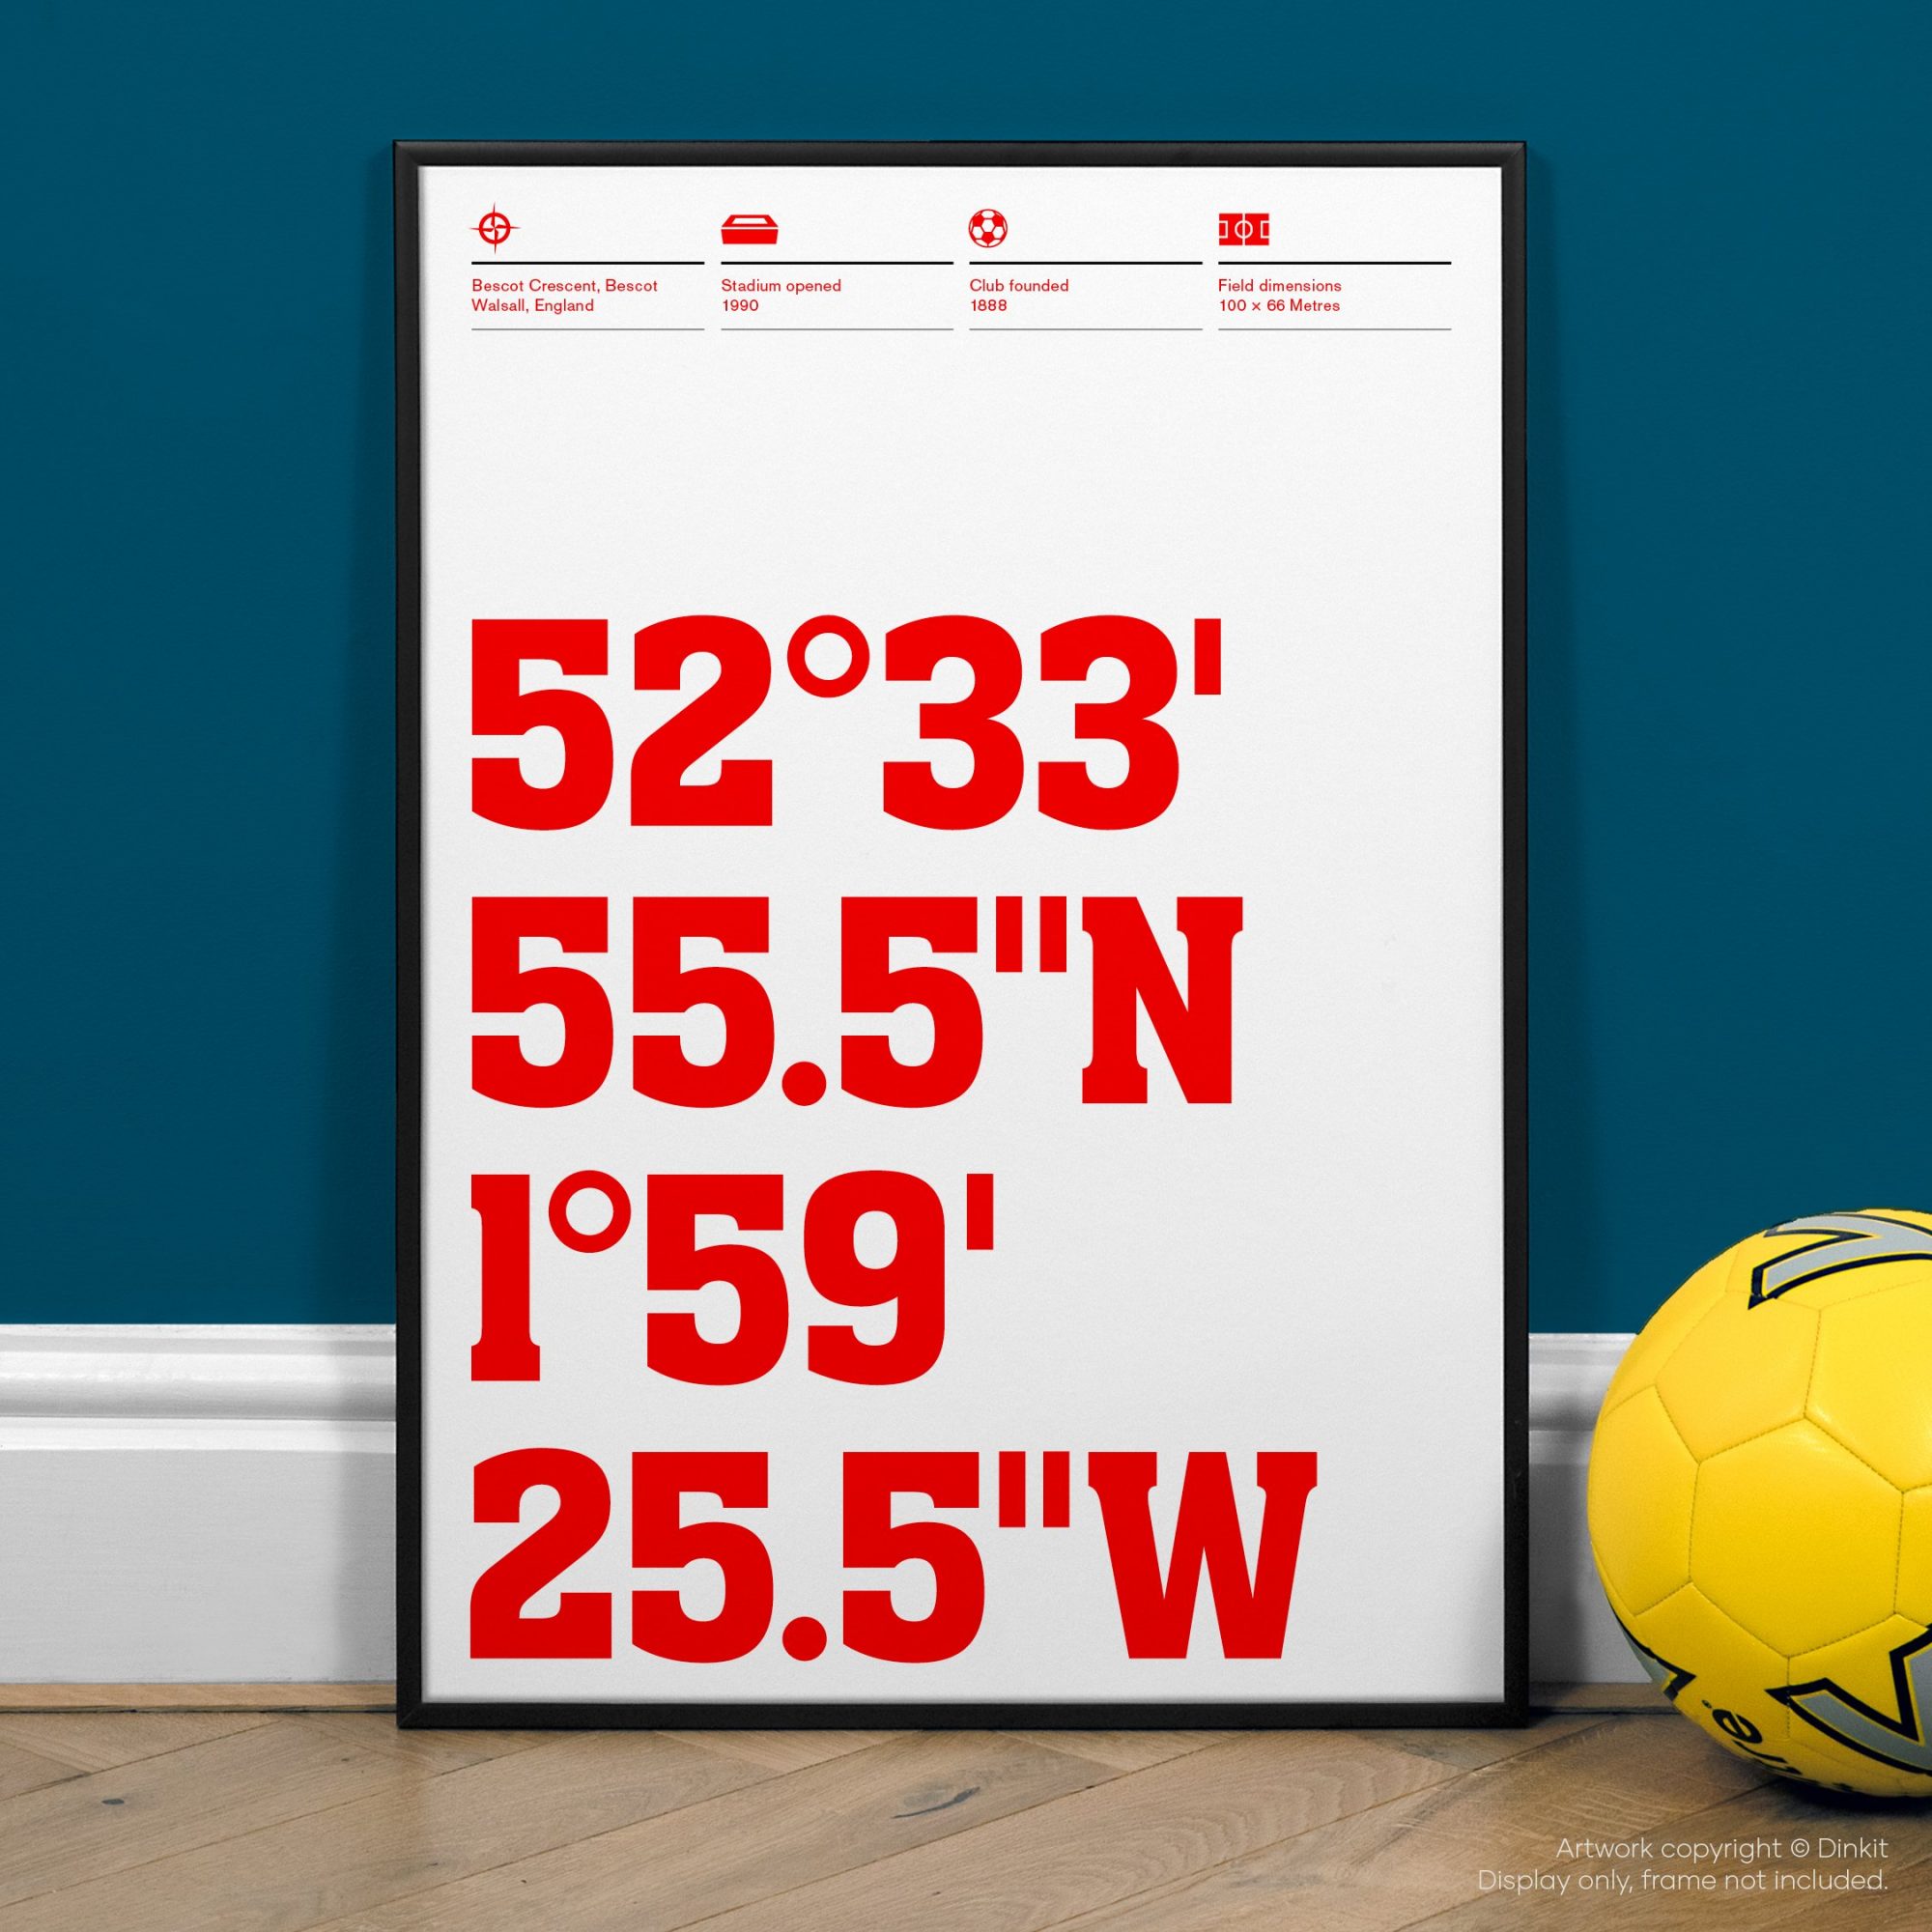 Walsall Gifts, Football Posters, Gift Ideas